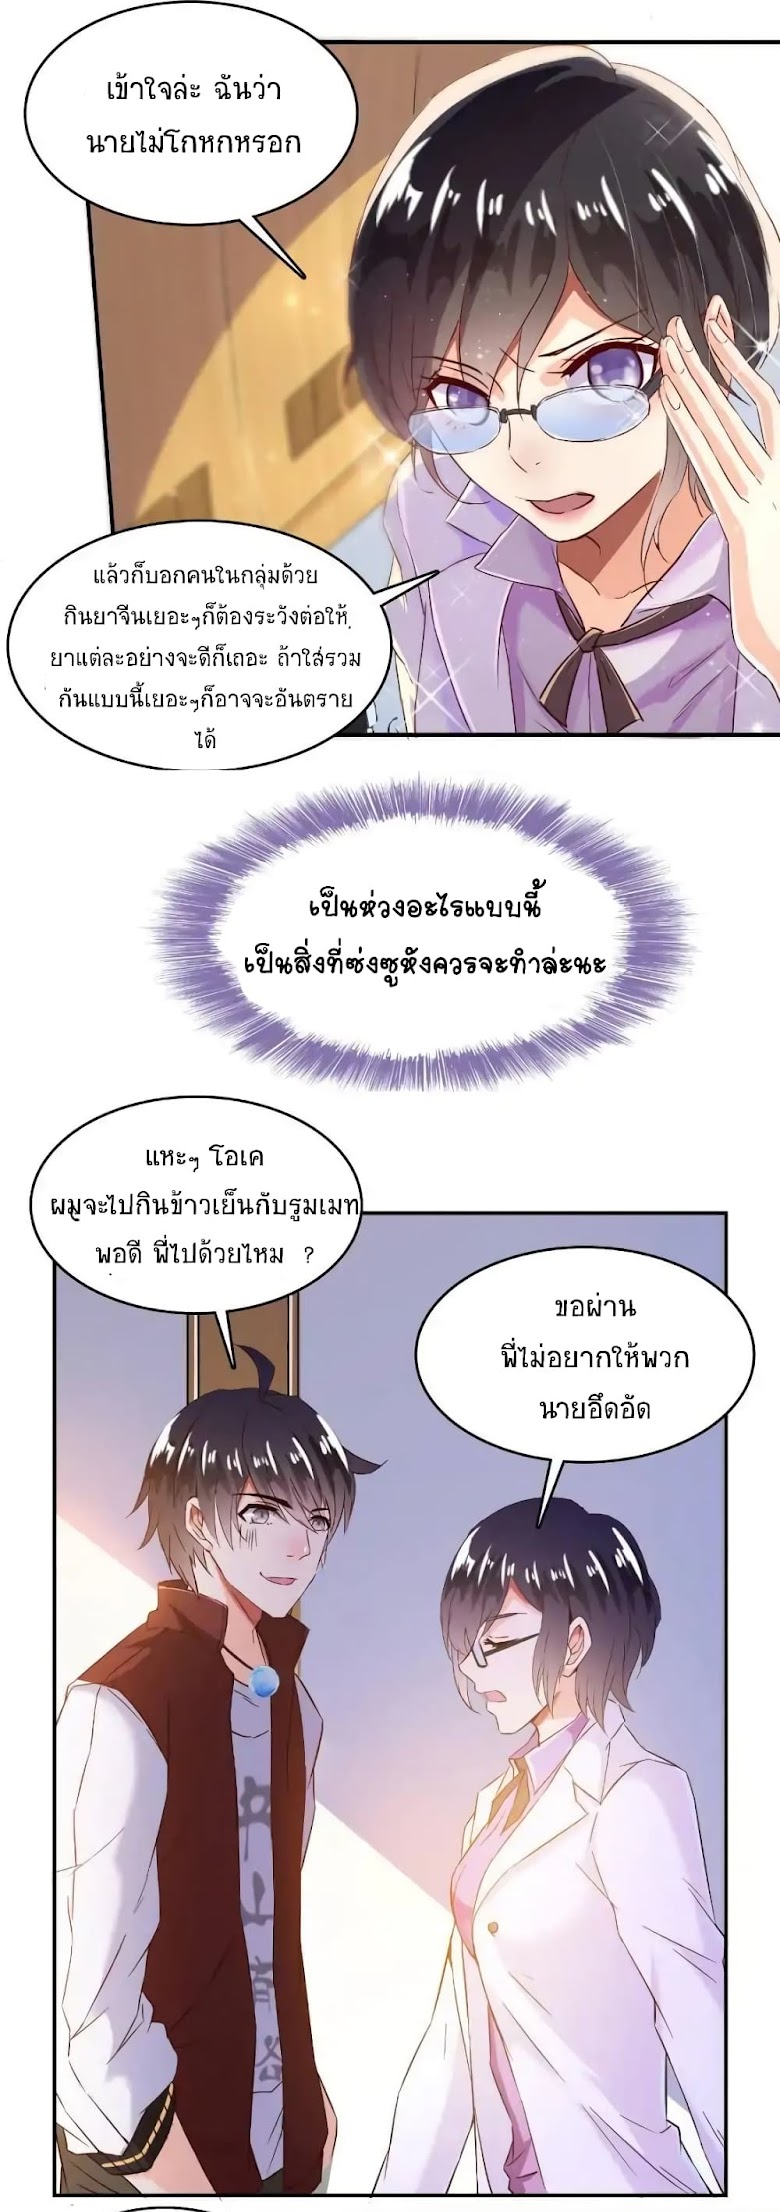 Cultivation Chat Group - หน้า 10